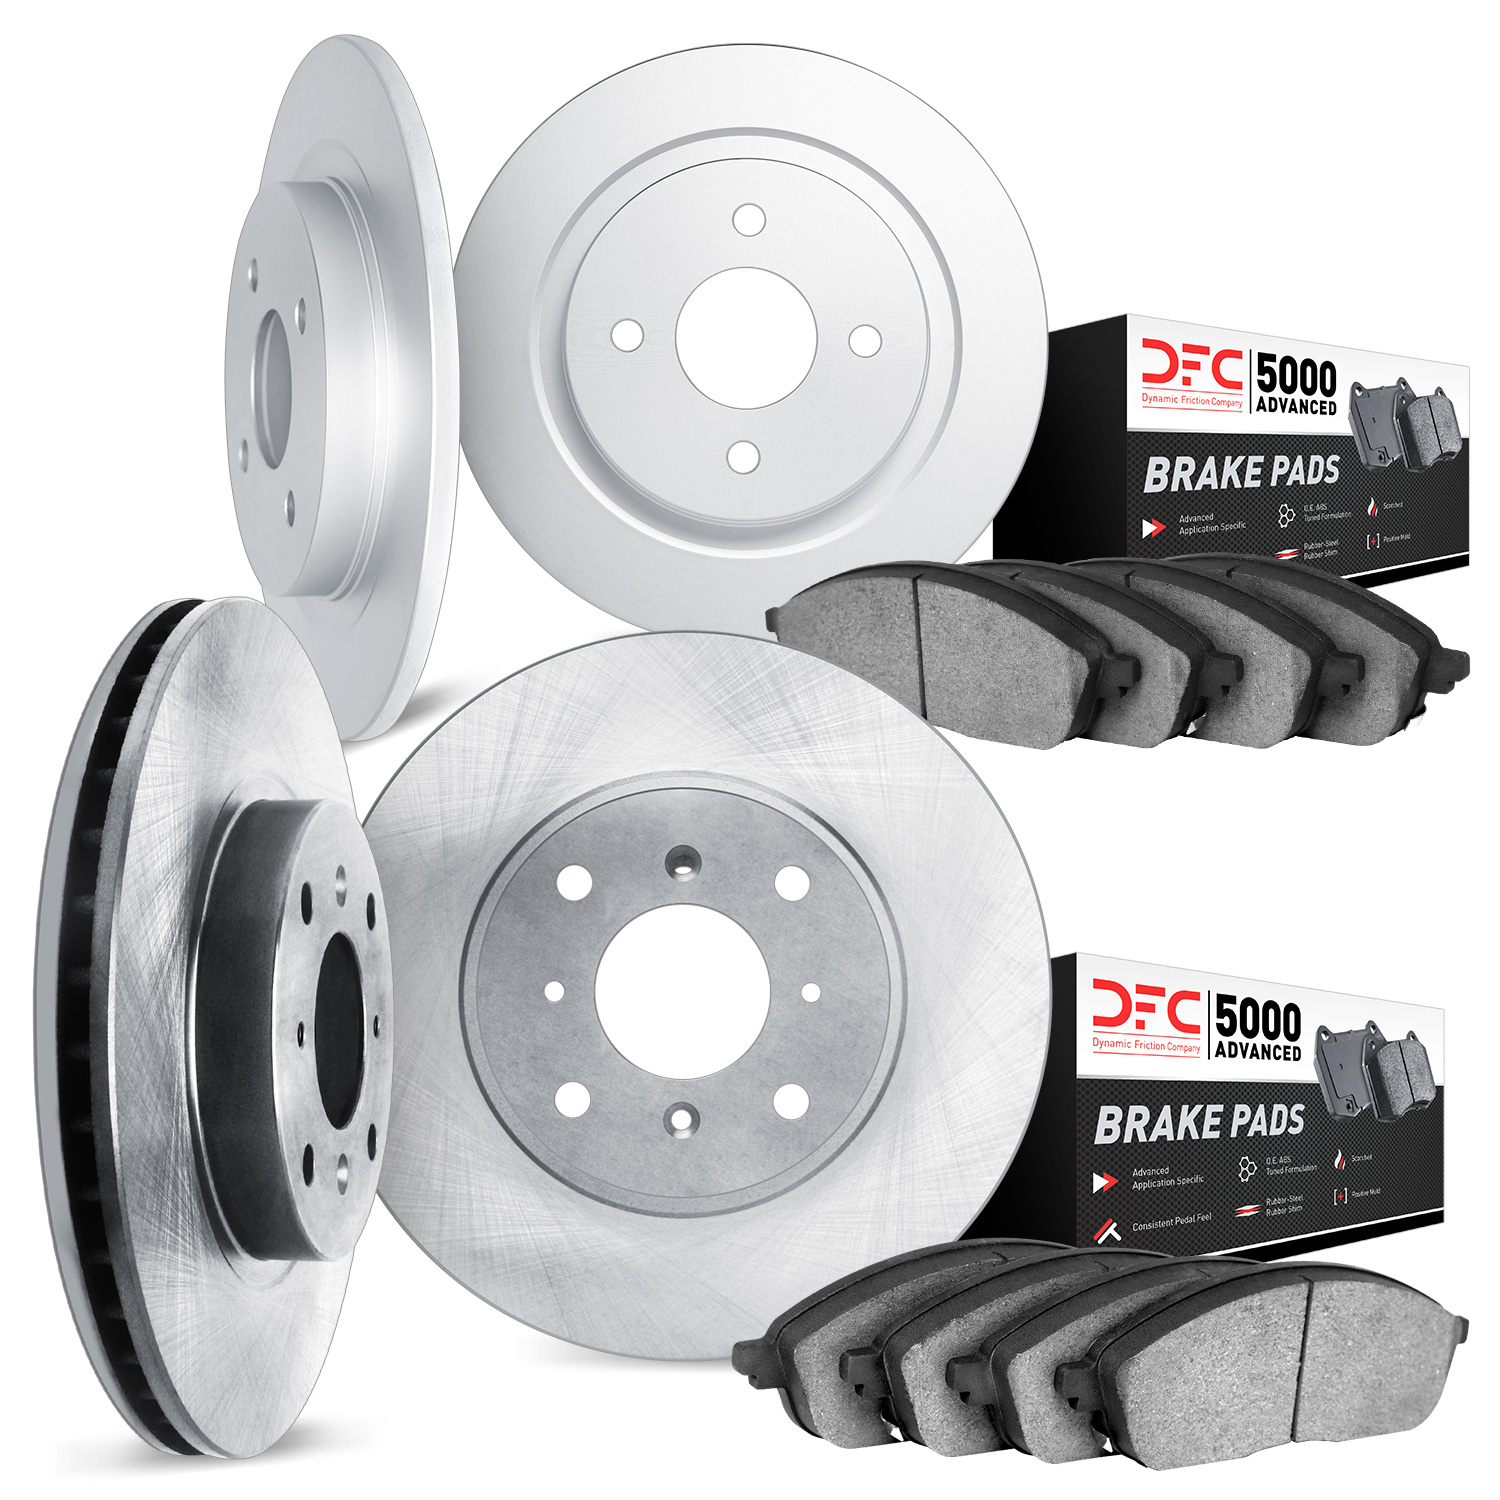 6504-65019 Brake Rotors w/5000 Advanced Brake Pads Kit, 1987-1993 GM, Position: Front and Rear